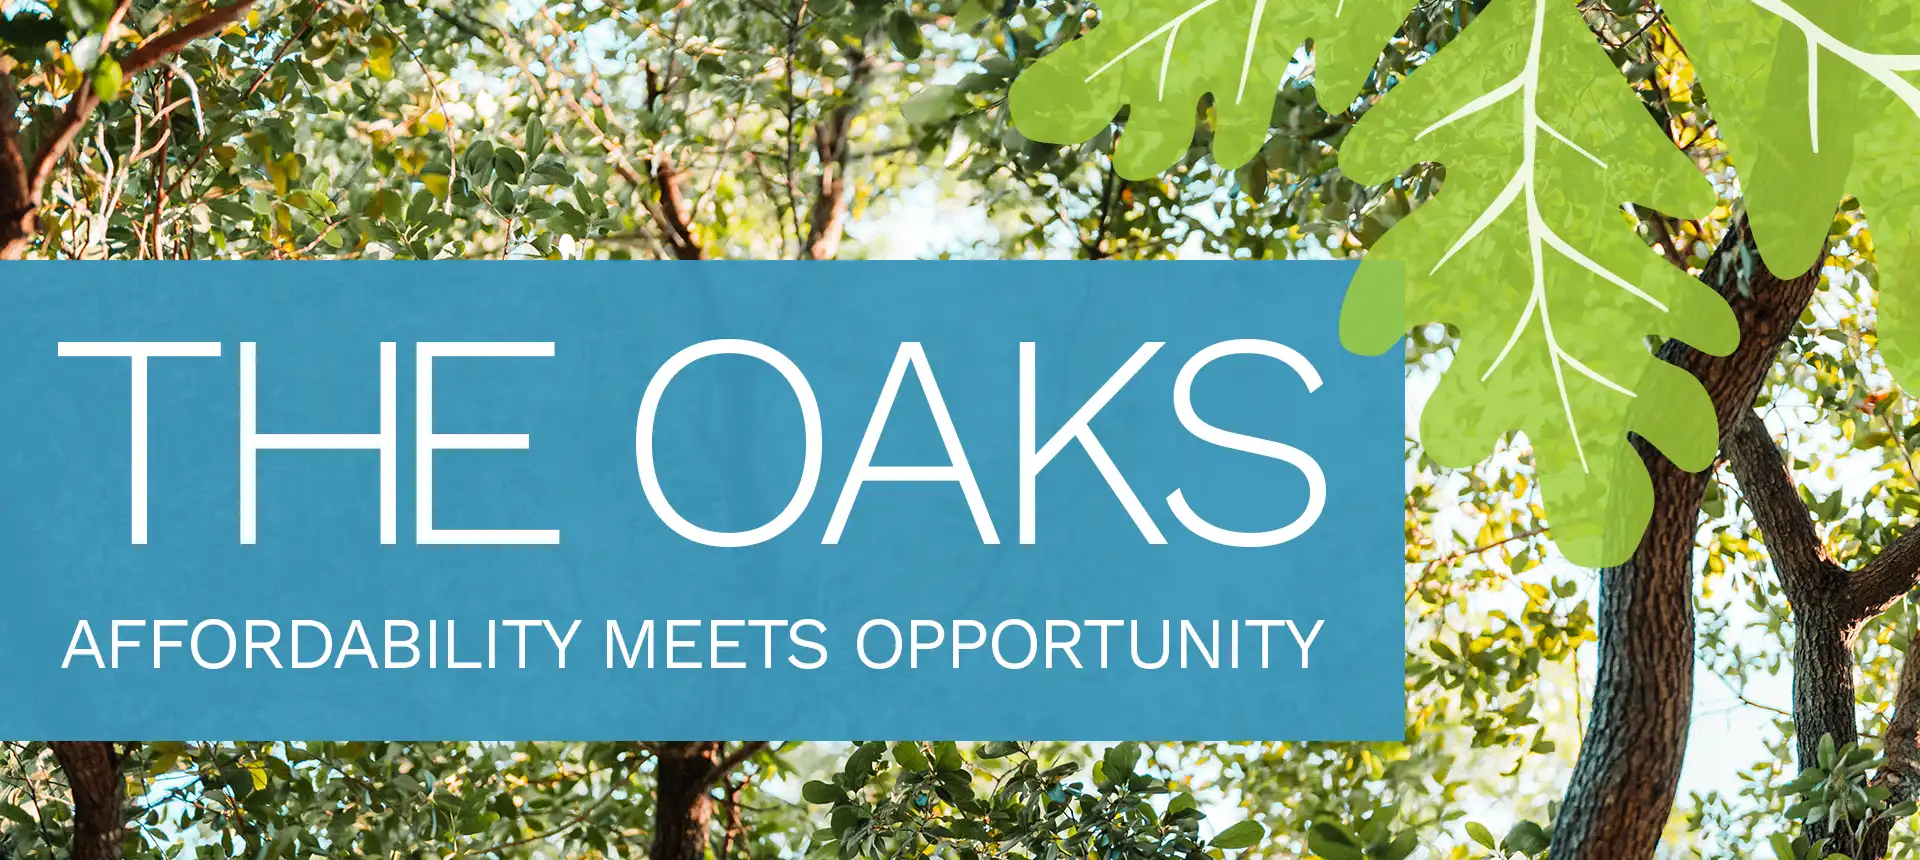 The Oaks: Affordability meets opportunity